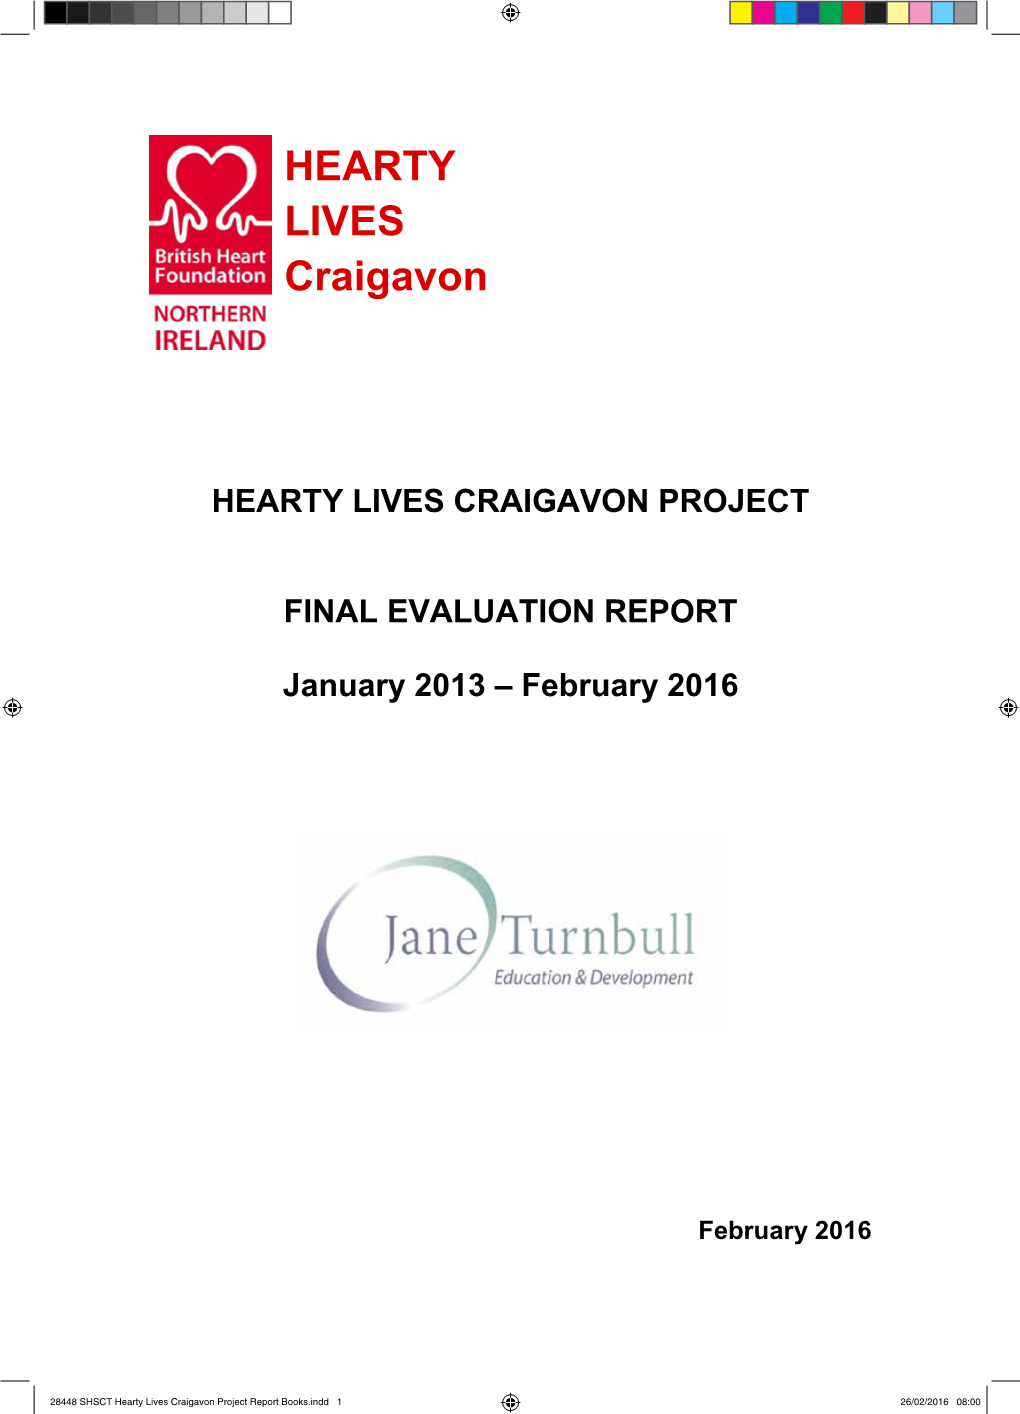 Hearty Lives Craigavon Project